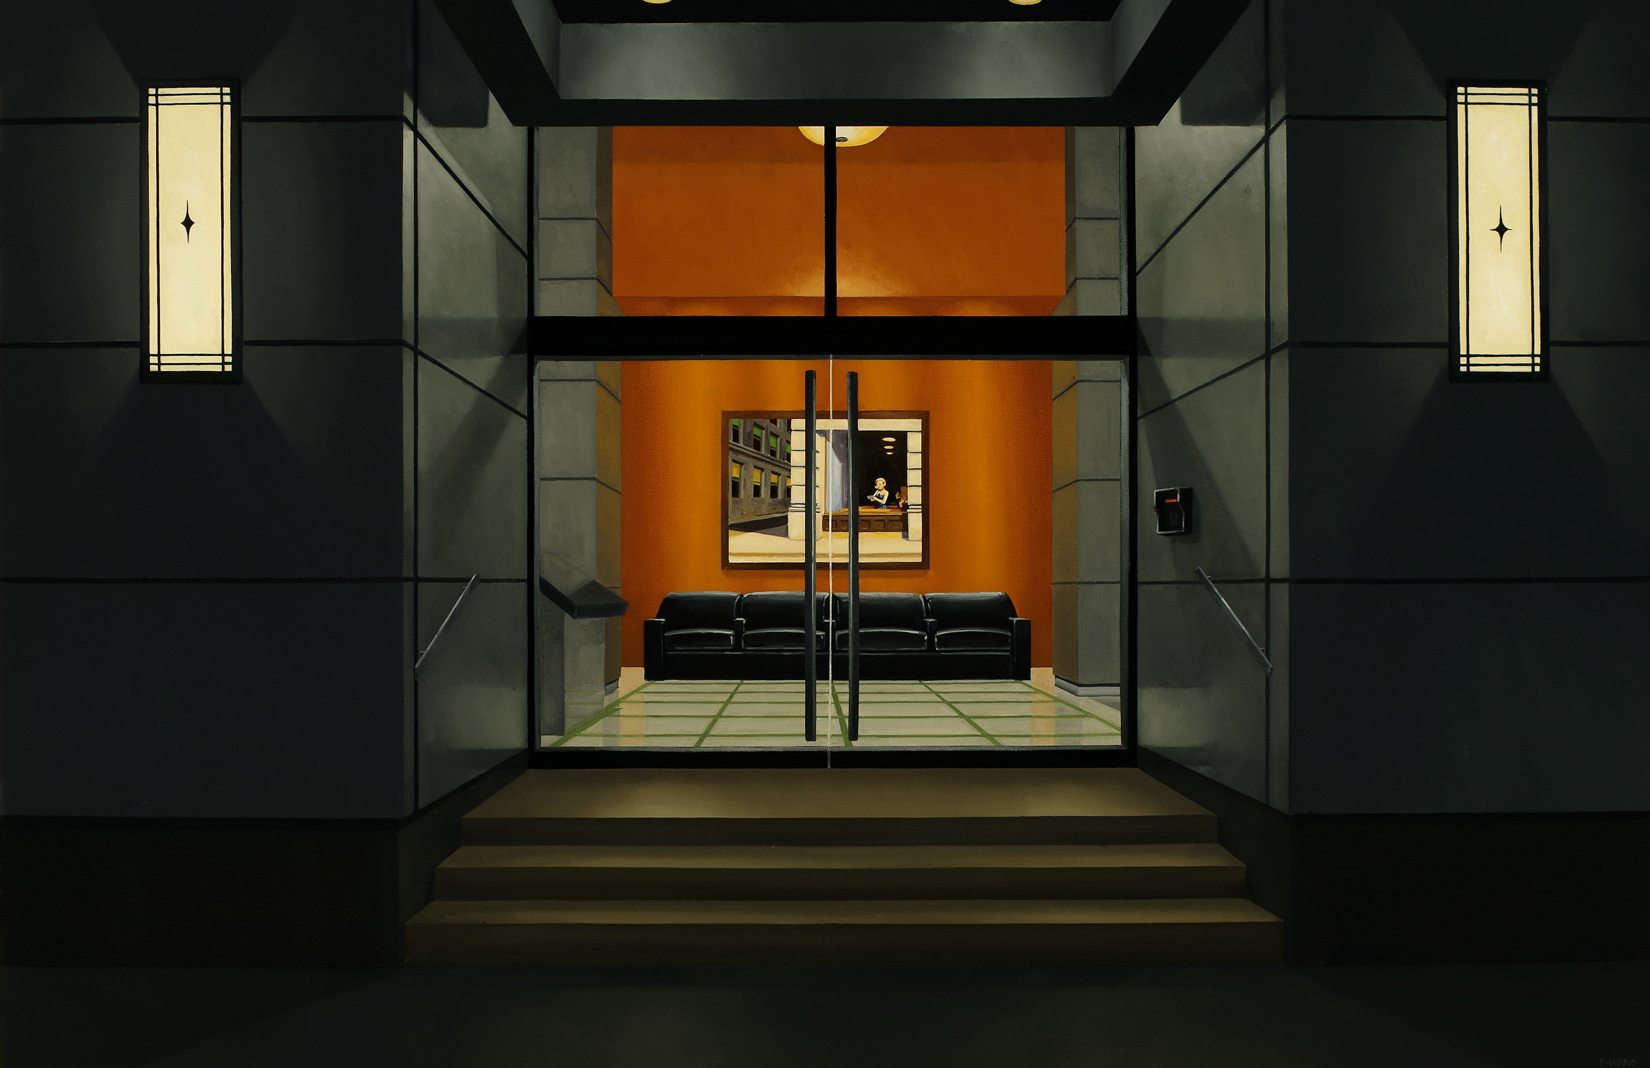 Edward Hopper Miniatures Hang Inside These Paintings Of Empty Lobbies